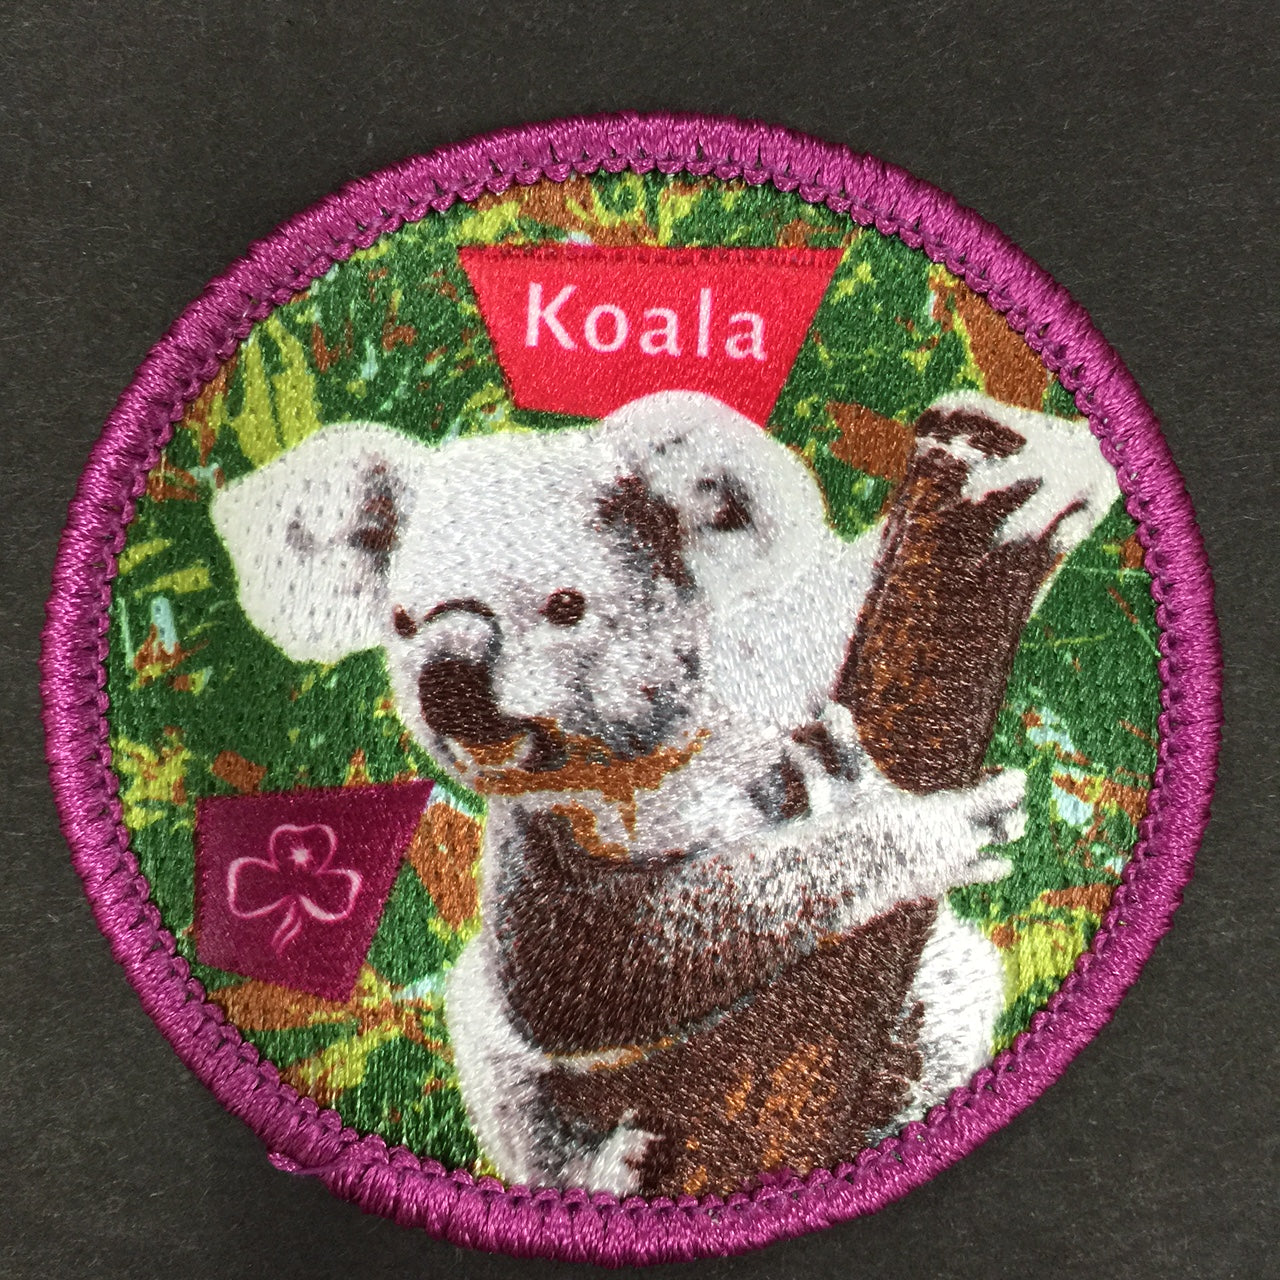 round badge that is bound in purple that shows a koala holding onto a tree branch